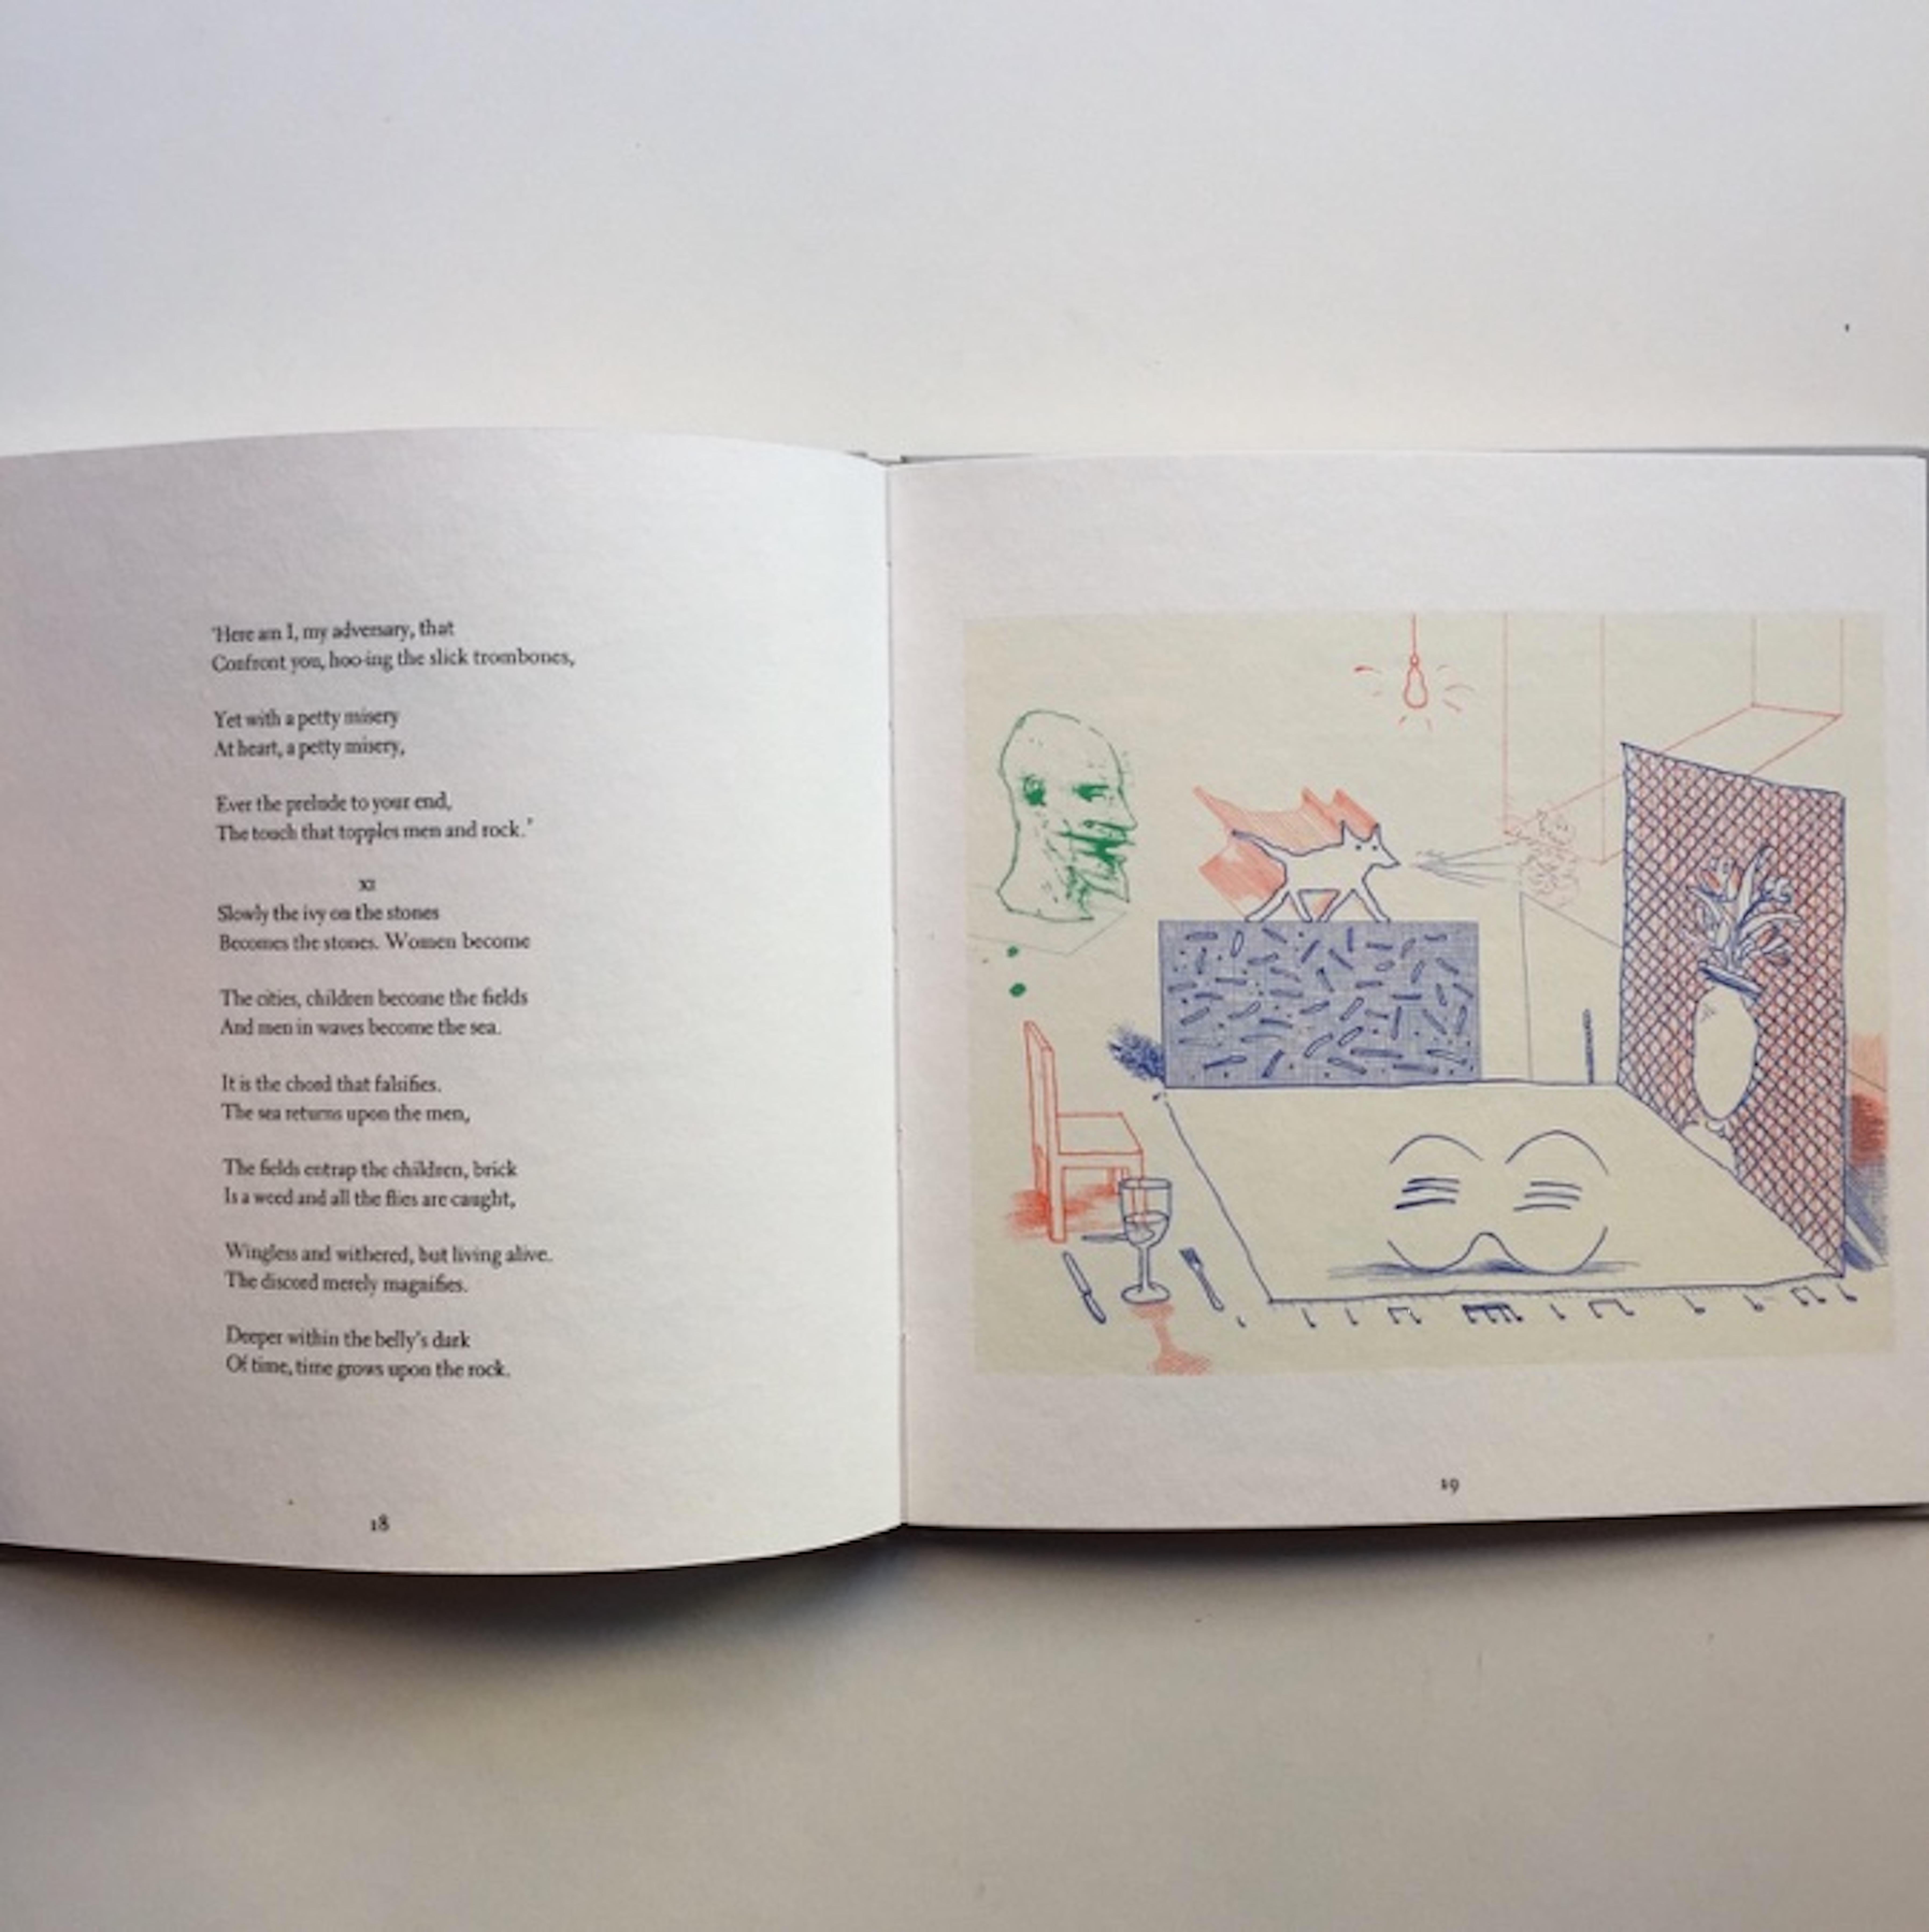 First edition, published by The St. Petersburg Press, London 1977

Etchings by David Hockney who was inspired by Wallace Stevens who was inspired by Pablo Picasso.

In this beautiful book, Hockney’s etched illustrations accompany the poem that